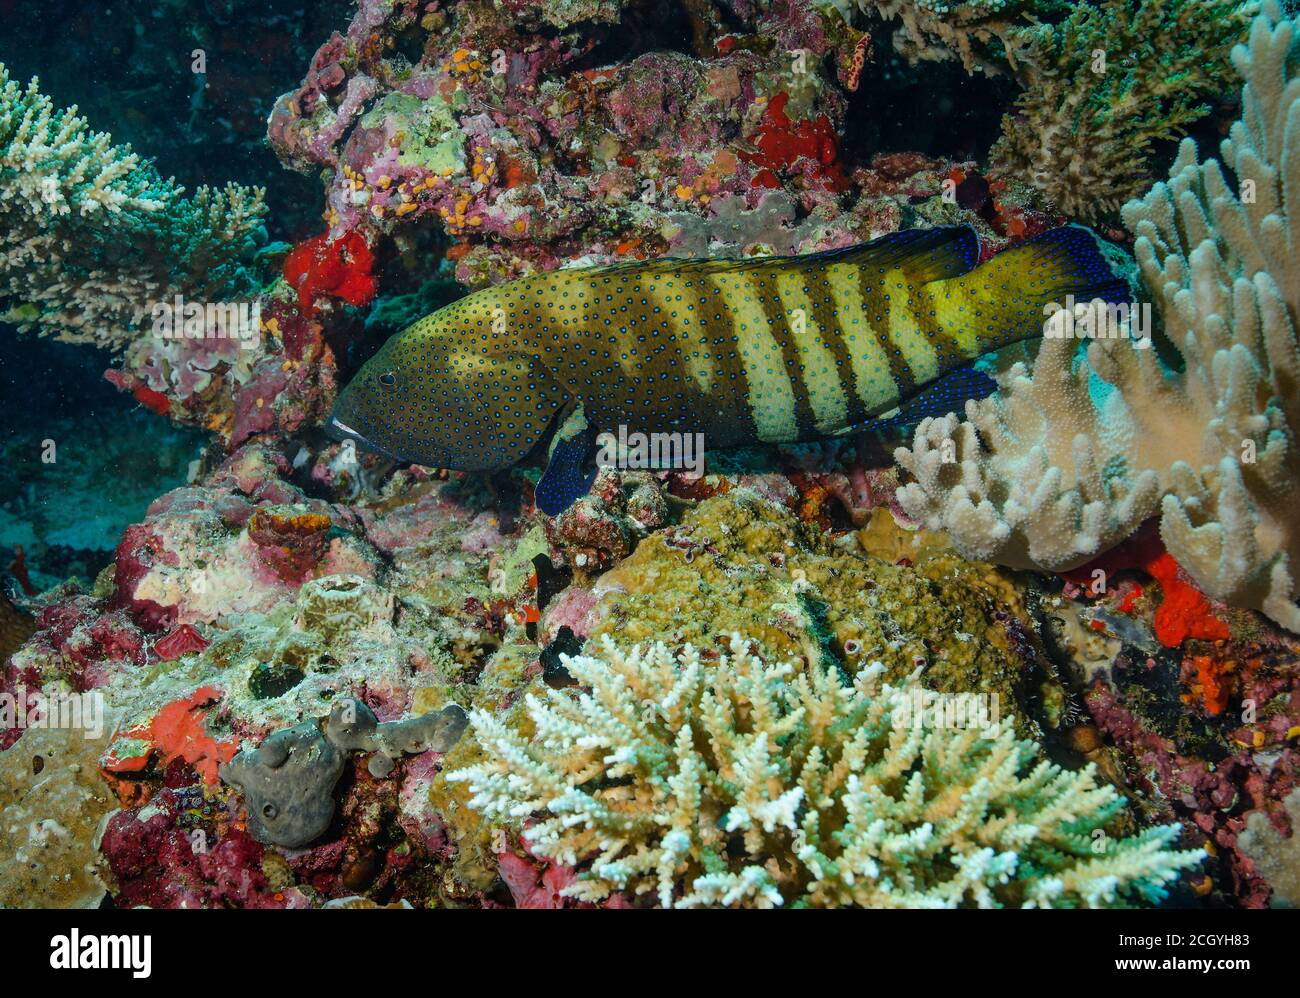 Blue-Spotted Grouper, Cephalopholis Argus, in coral reef in Bathala, Maldives Stock Photo